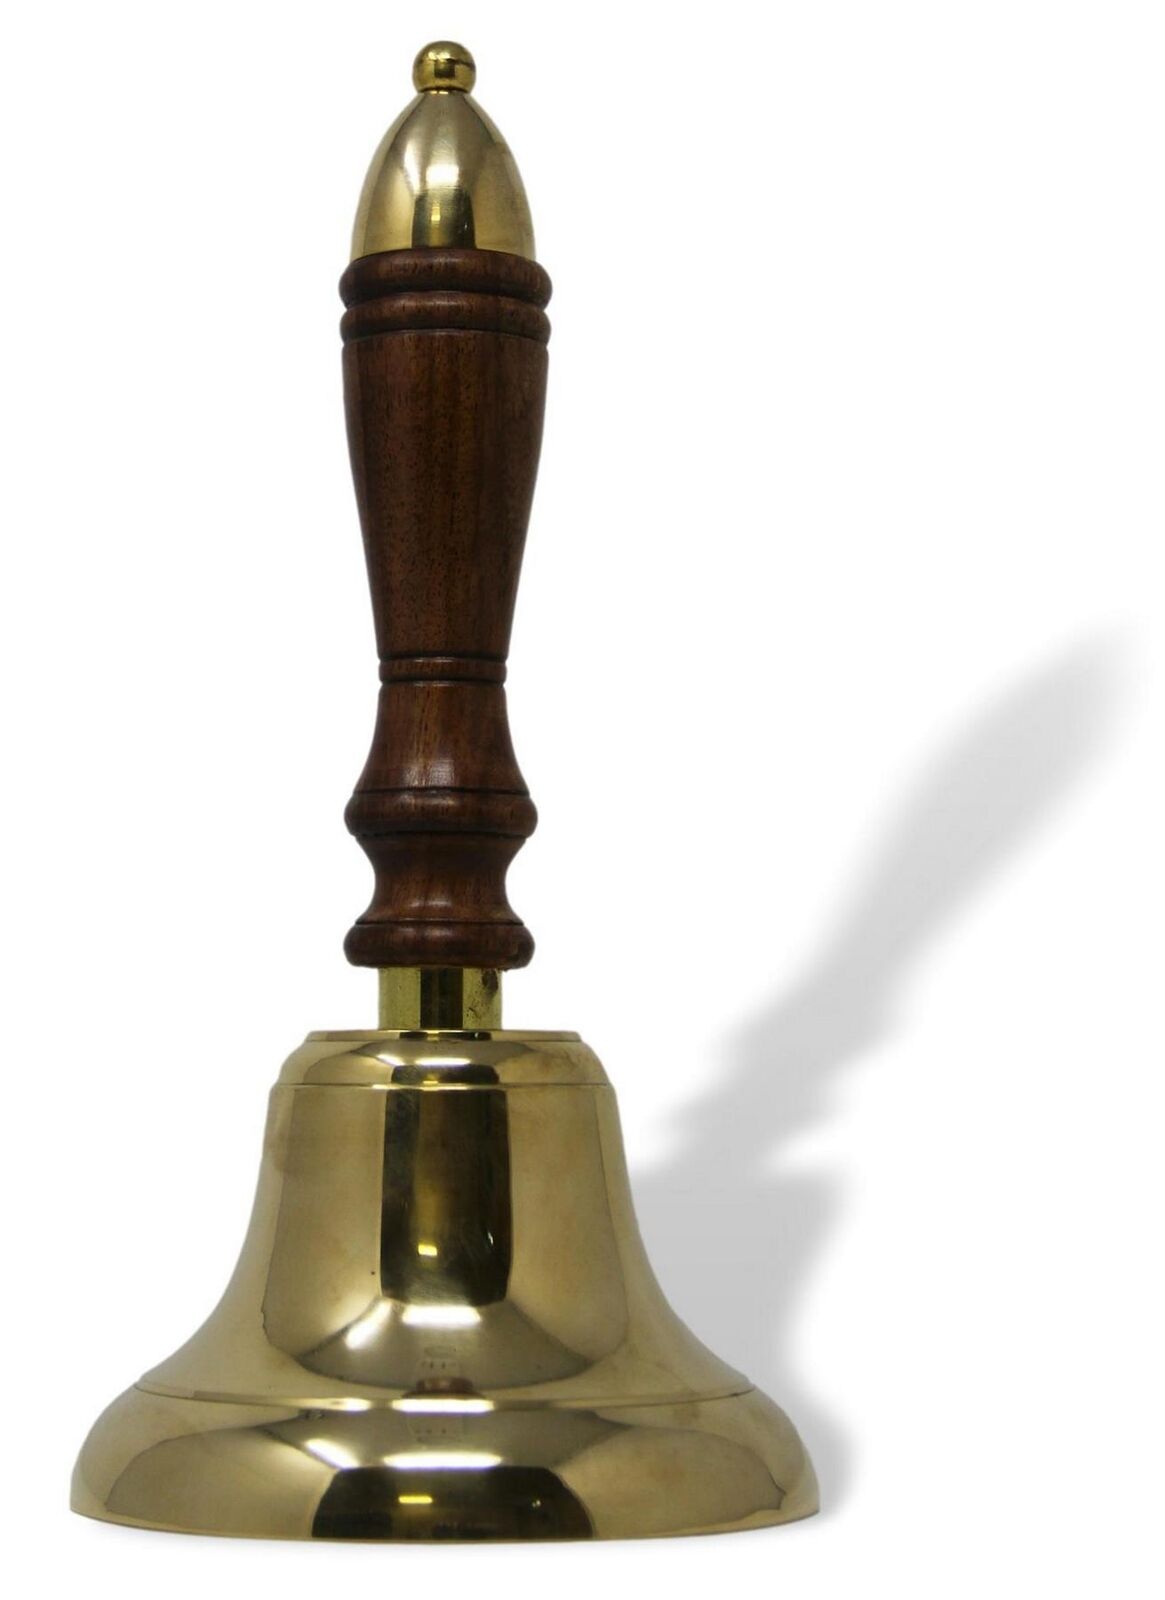 Wooden handled Solid Brass School Hand Bell with Split Ring Attachment